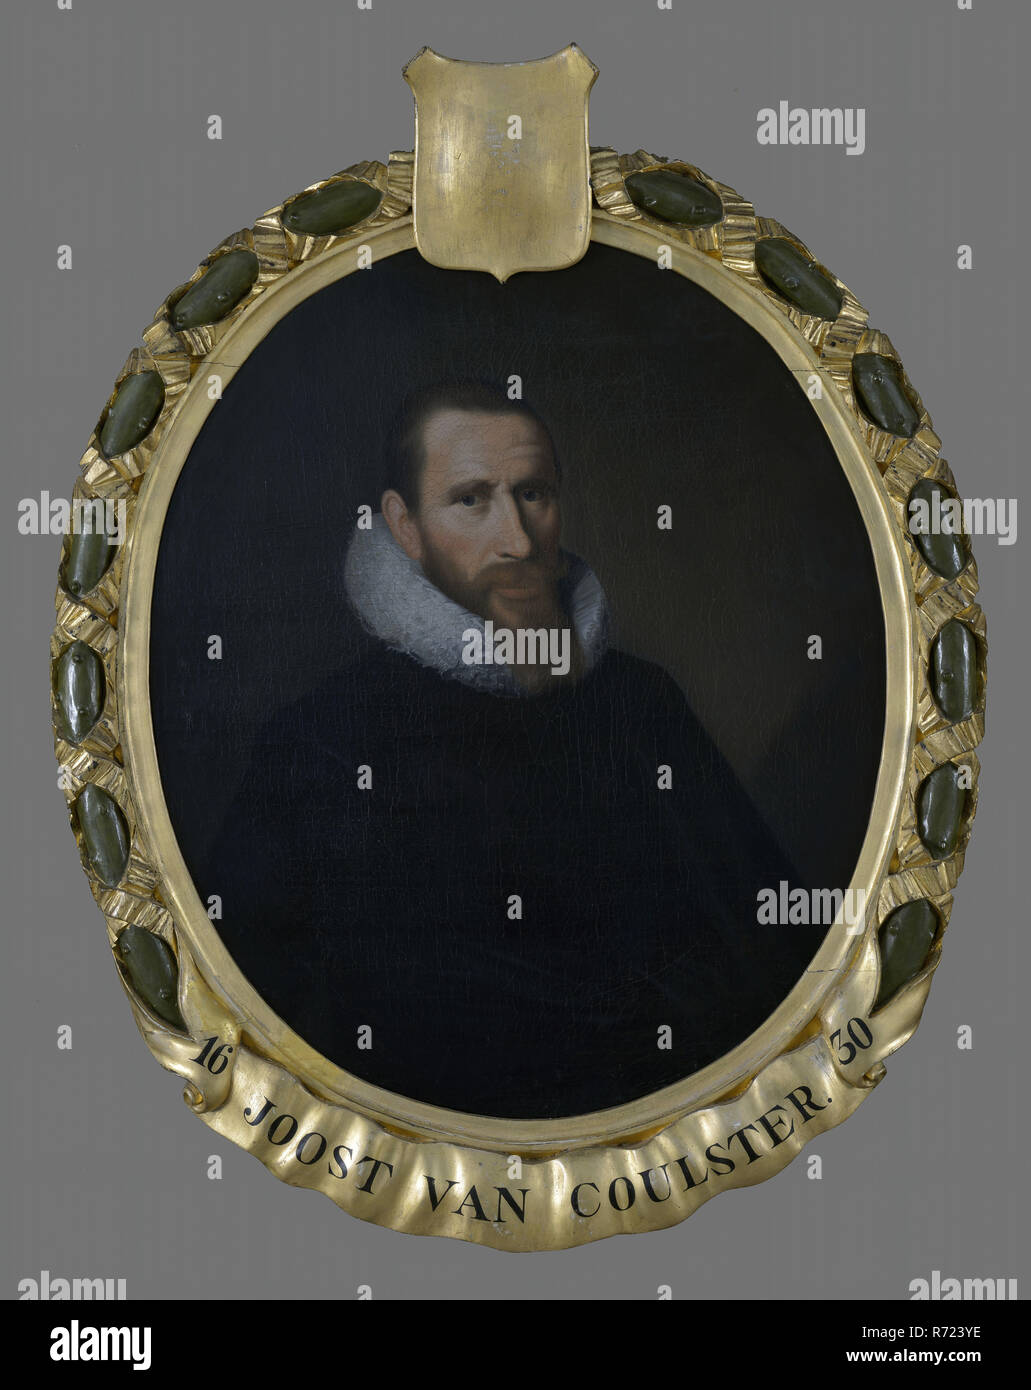 Pieter van der Werff, Portrait of Joost Adriaensz. Van Coulster (or: Colster) (? -1649), portrait painting footage linen oil painting canvas, Oval portrait of man representing Joost Adriaensz. van Coulster (? -1649), among others, founder of De Oranjeboom beer brewery and director of the VOC (1626-1636) Halfway face to face to the right. Short hair mustache and beard Millstone collar and dark robe Banderol on frame in black paint: 16 JOOST VAN COULSTER. 30 Dutch East India Company VOC Rotterdam Stadscentrum Stadsdriehoek Boompjes director beer Oranjeboom Kralingen This portrait originally hung Stock Photo